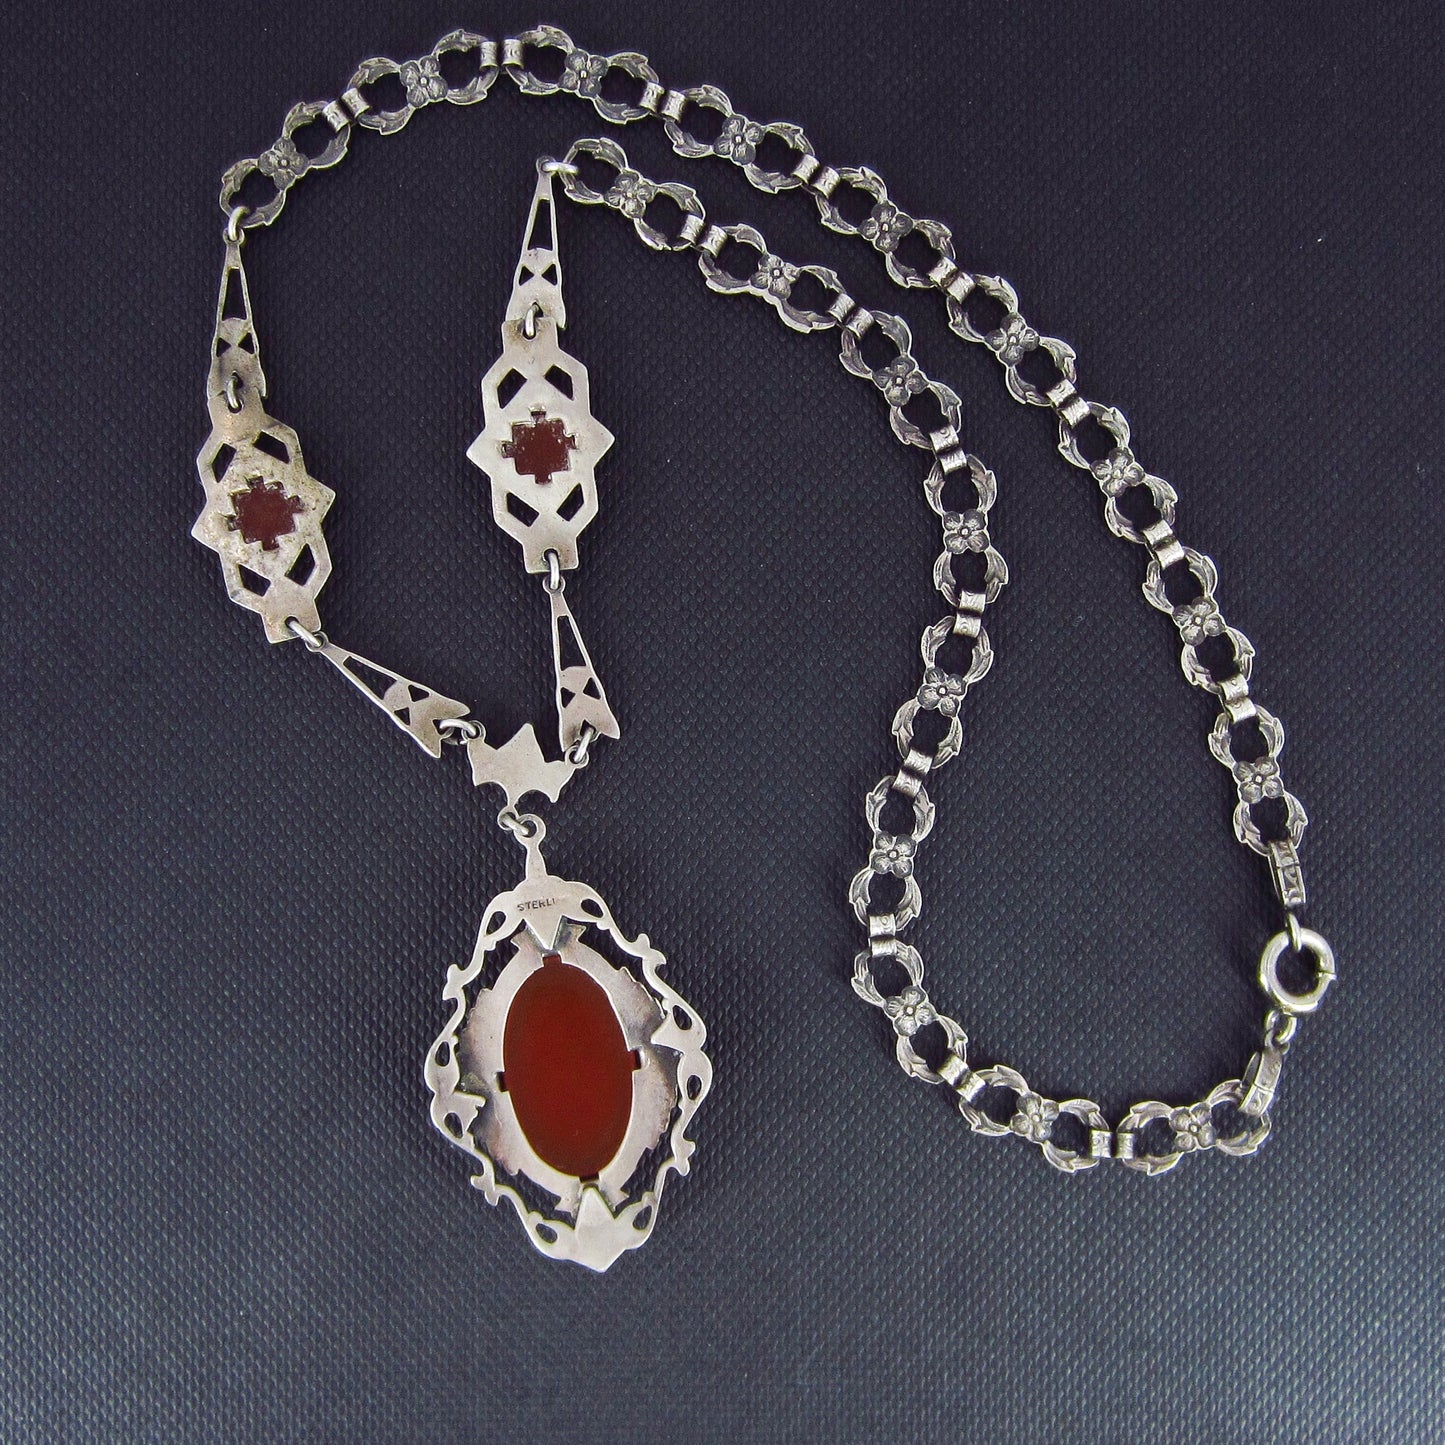 SOLD--Art Deco Carnelian and Marcasite Necklace Sterling c. 1930